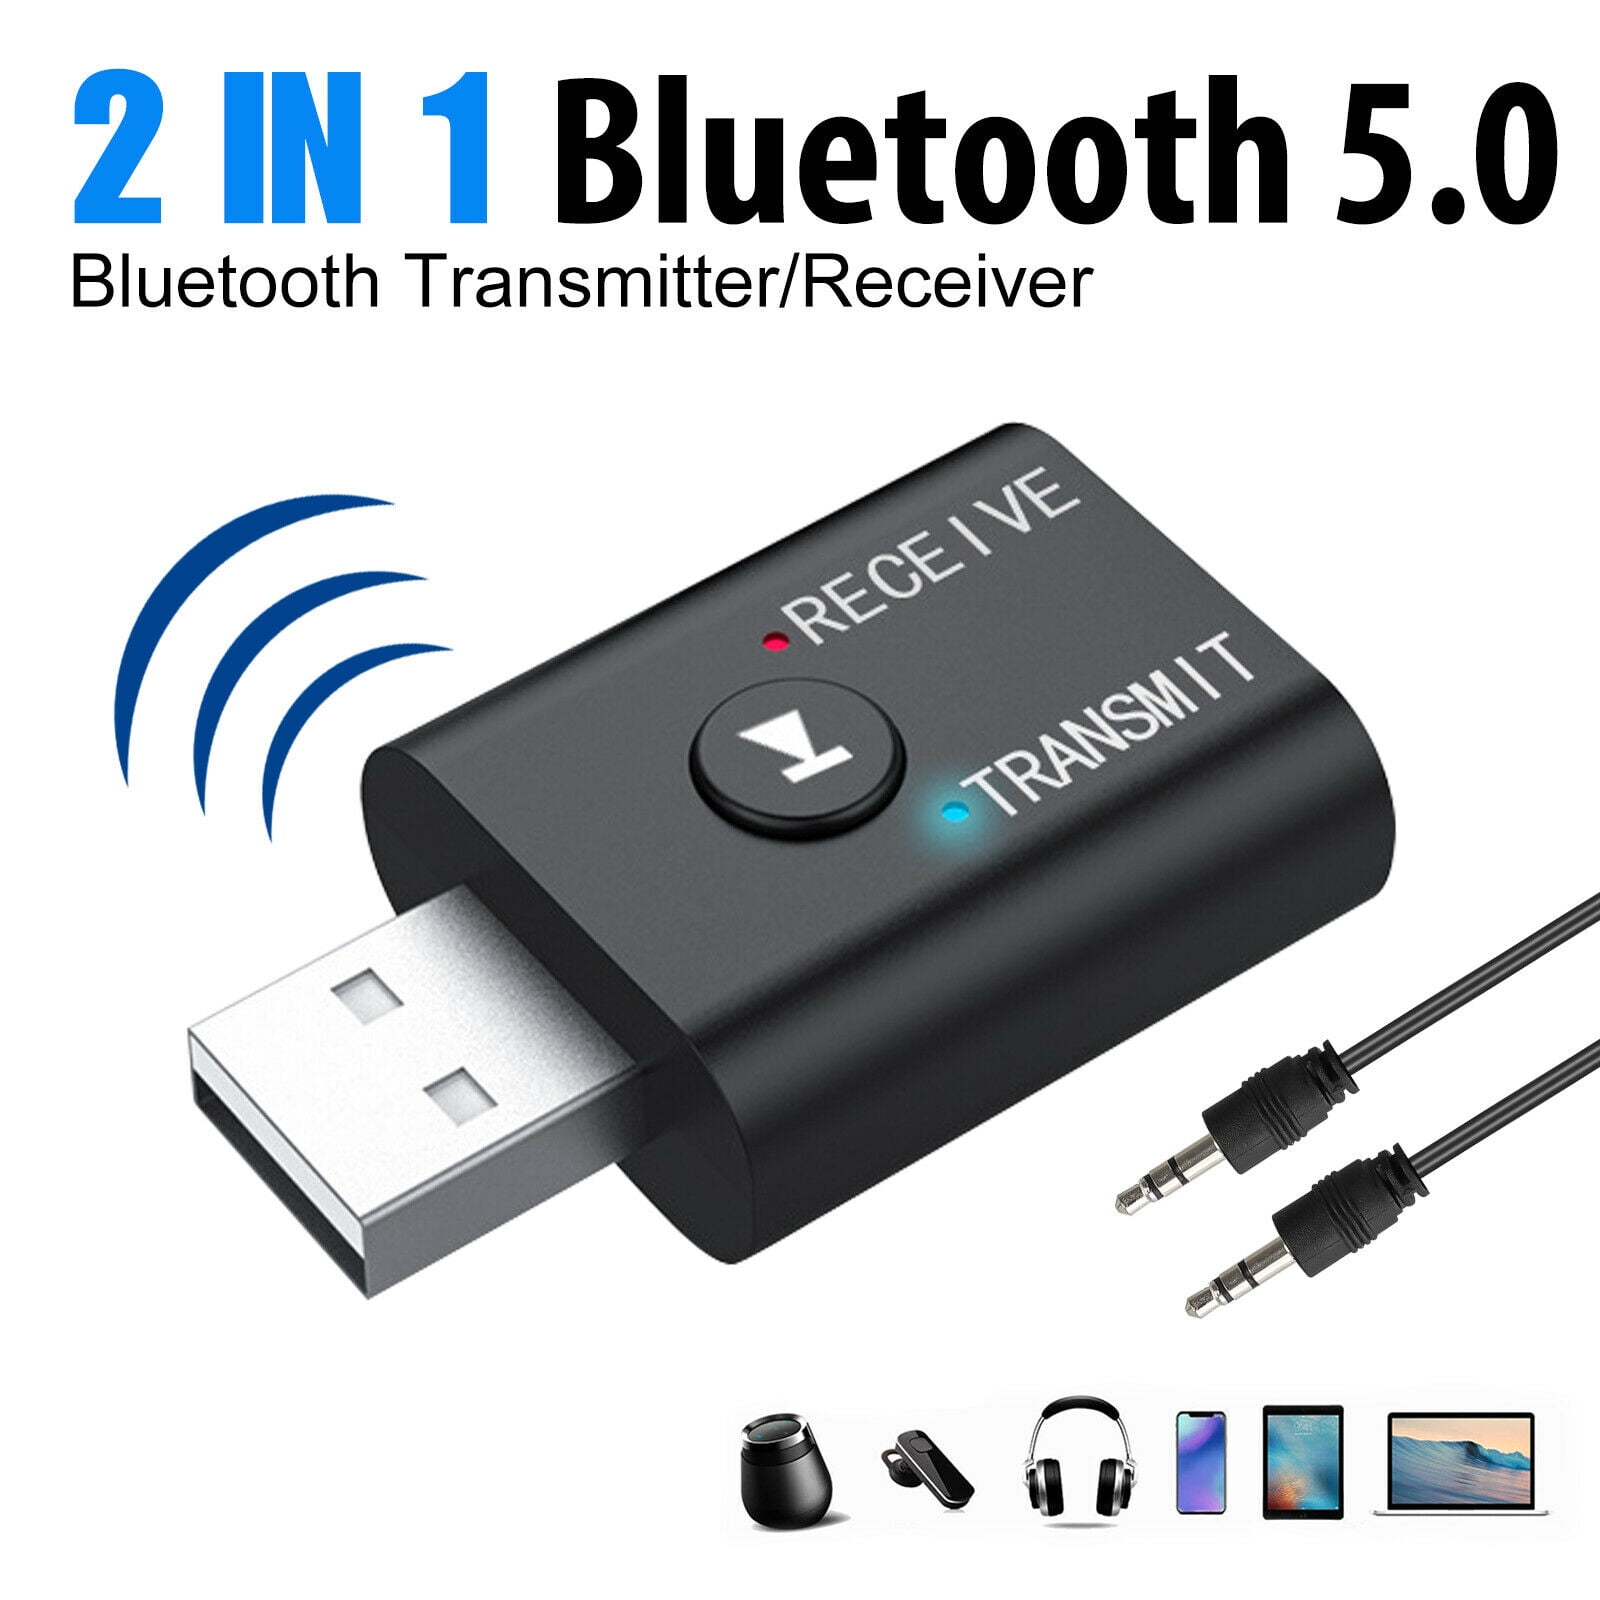 Bluetooth 5.0 Transmitter and Receiver, 2-in-1 Wireless 3.5mm